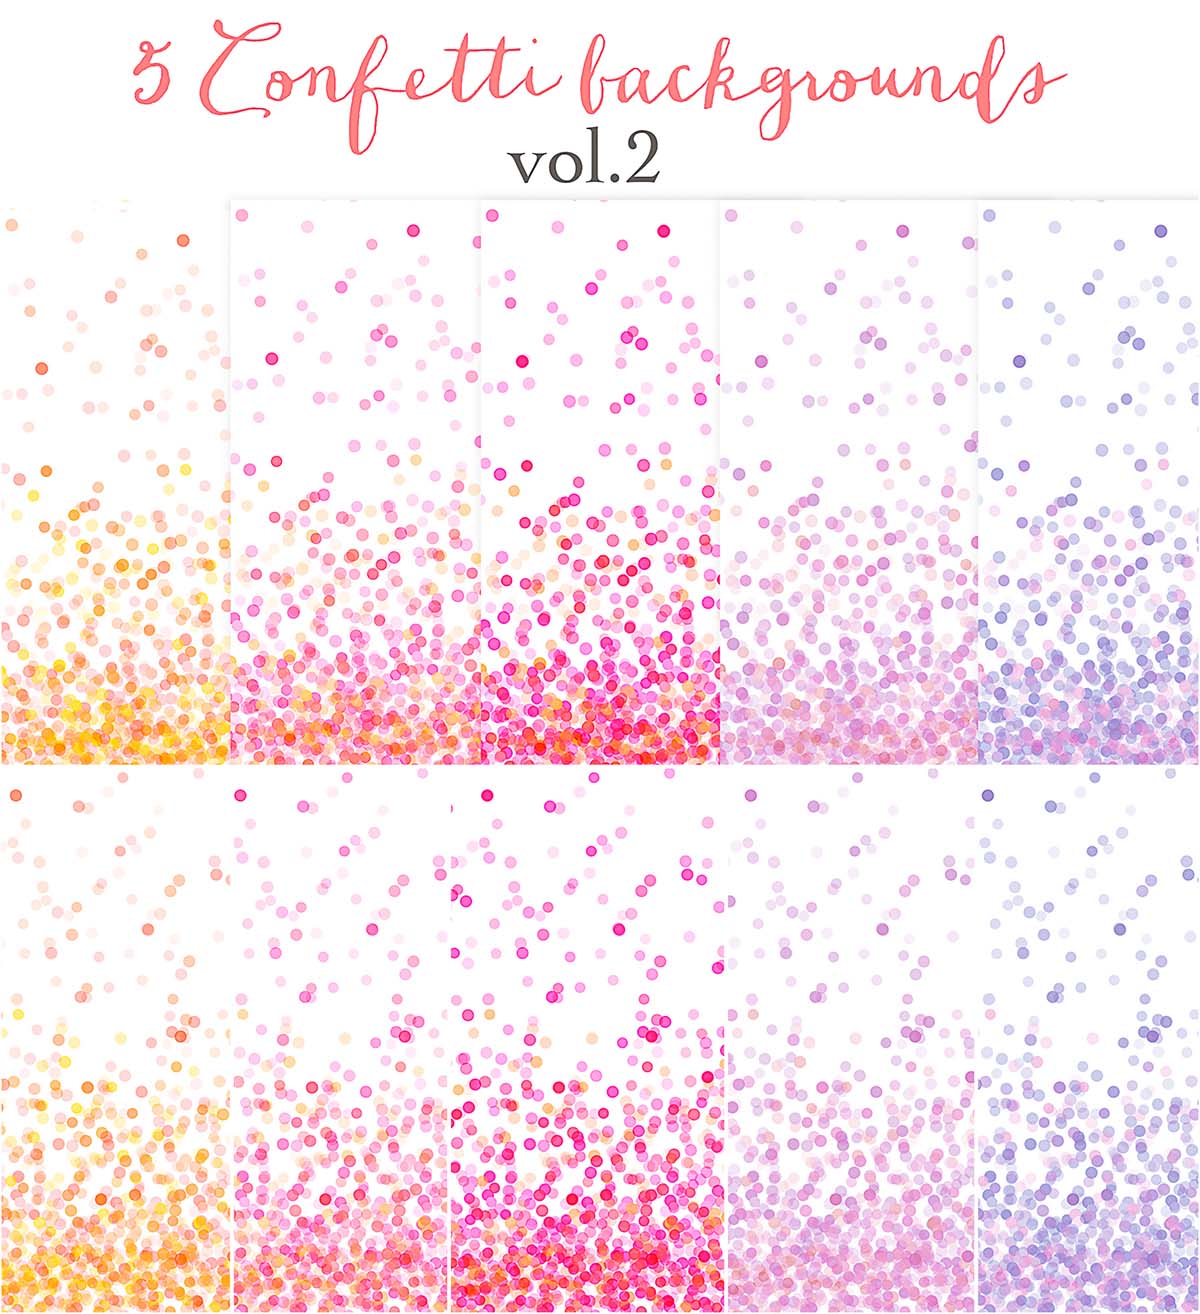 Bright pink confetti backgrounds set